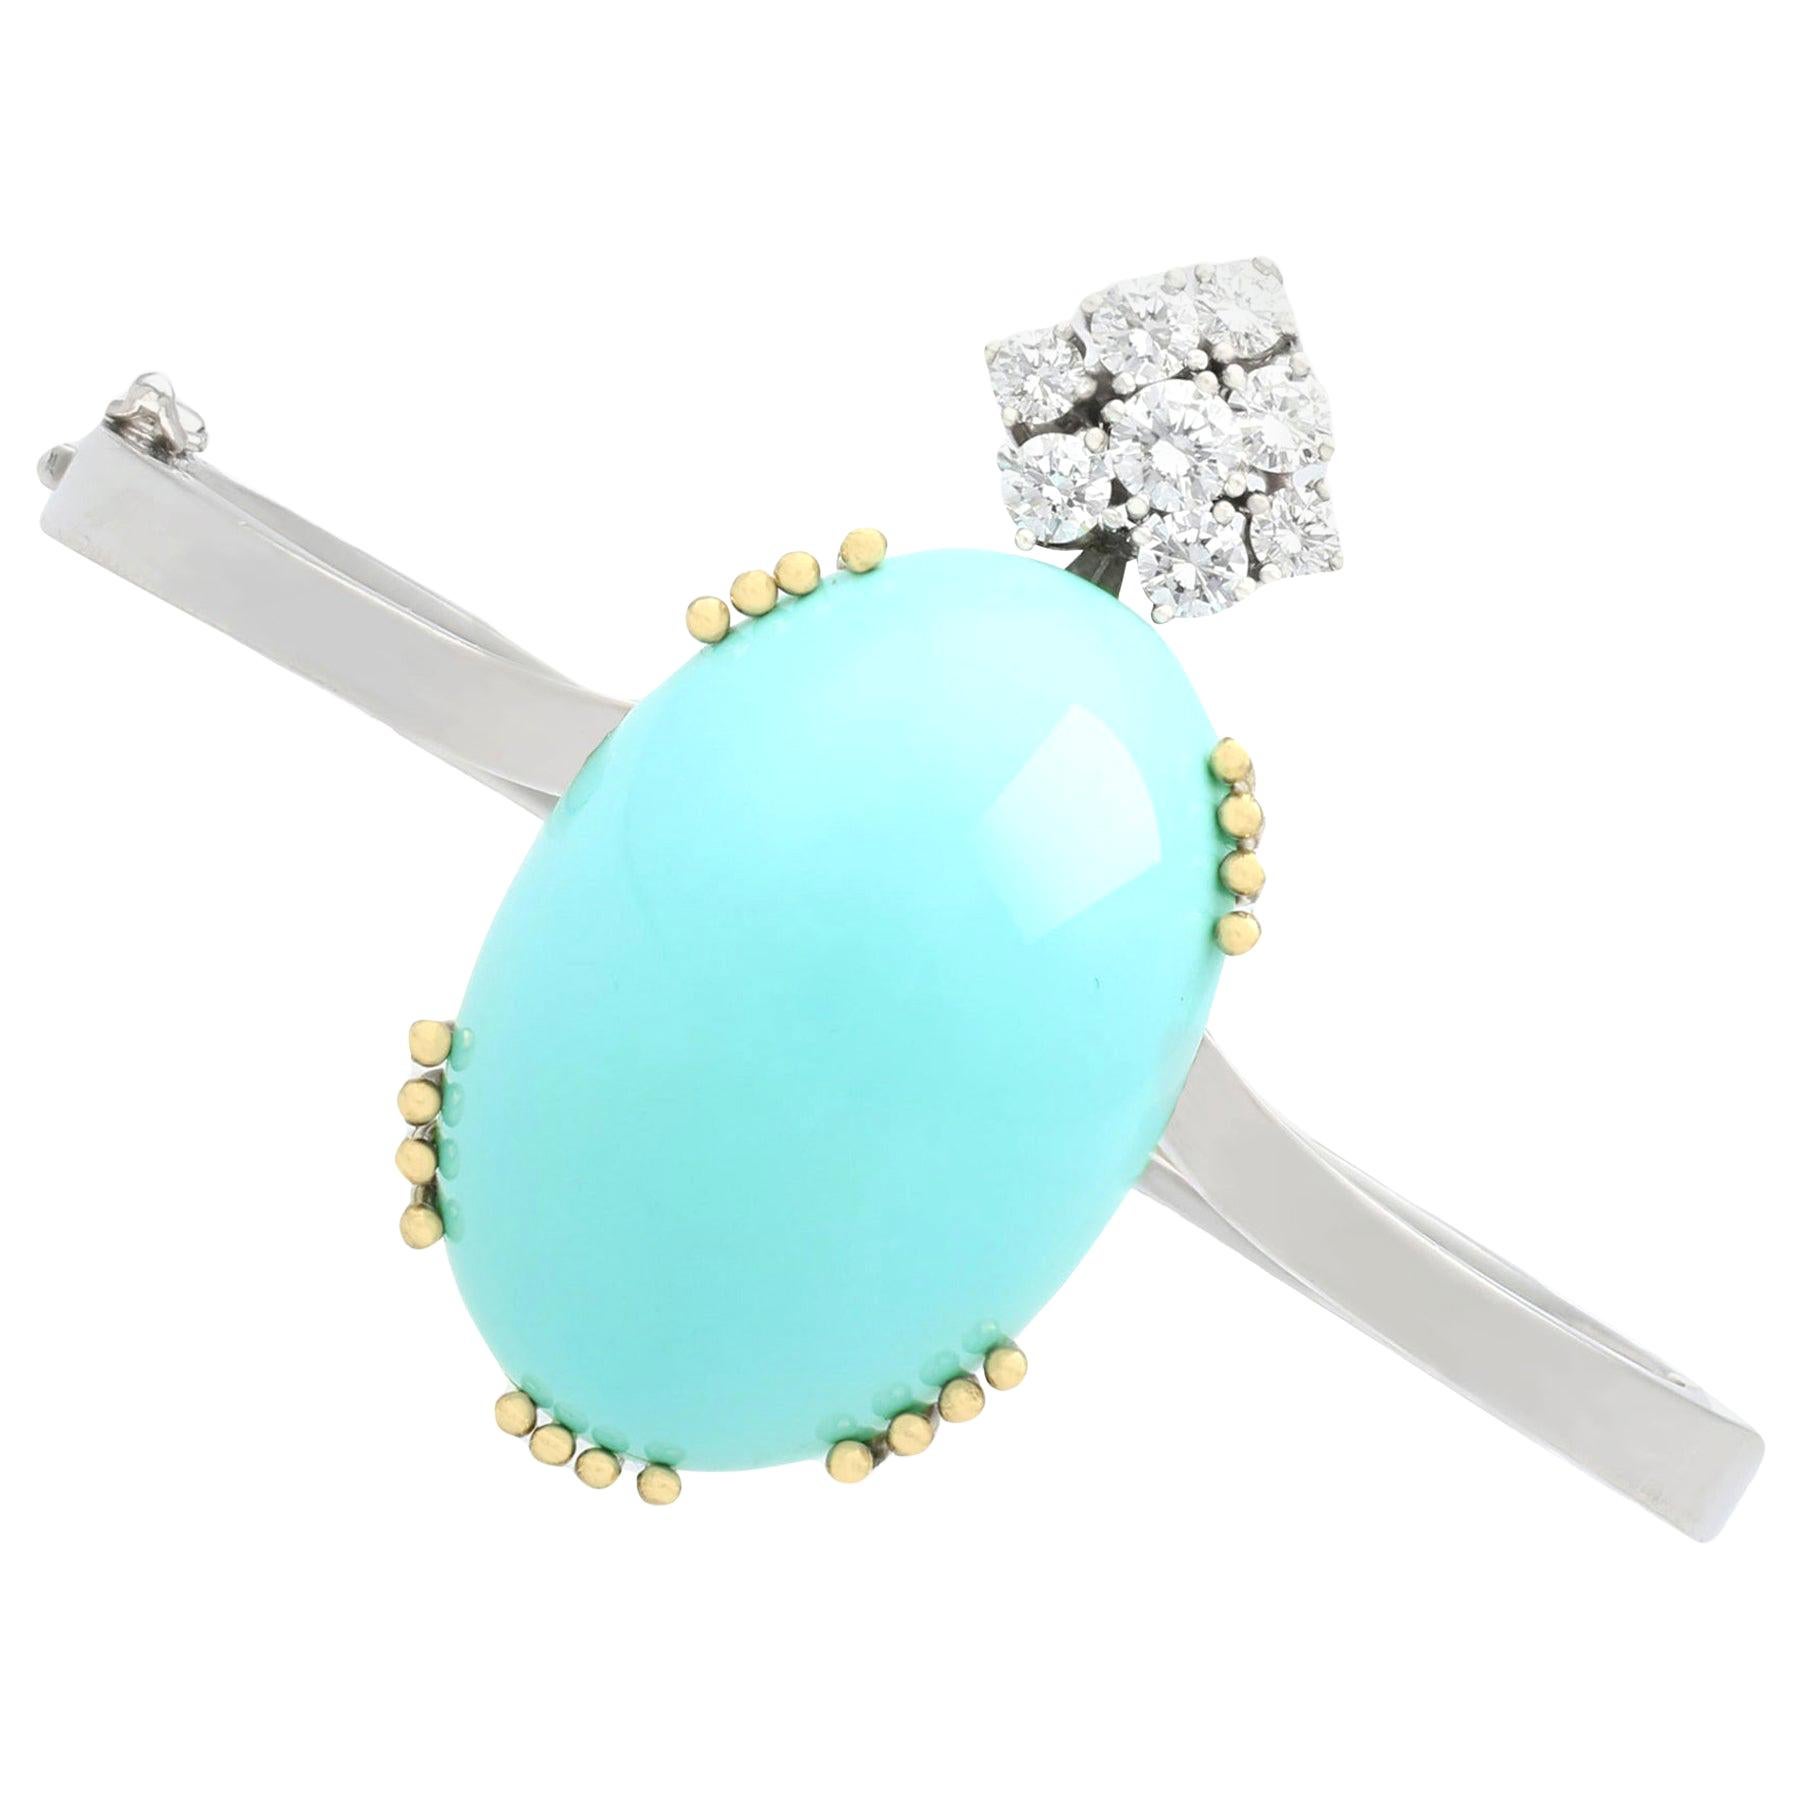 A stunning, fine and impressive vintage 43.44ct turquoise and 0.86ct diamond 18 karat white gold bangle; part of our diverse vintage jewelry and estate jewelry collections.

This stunning, fine and impressive vintage cabochon cut bangle has been